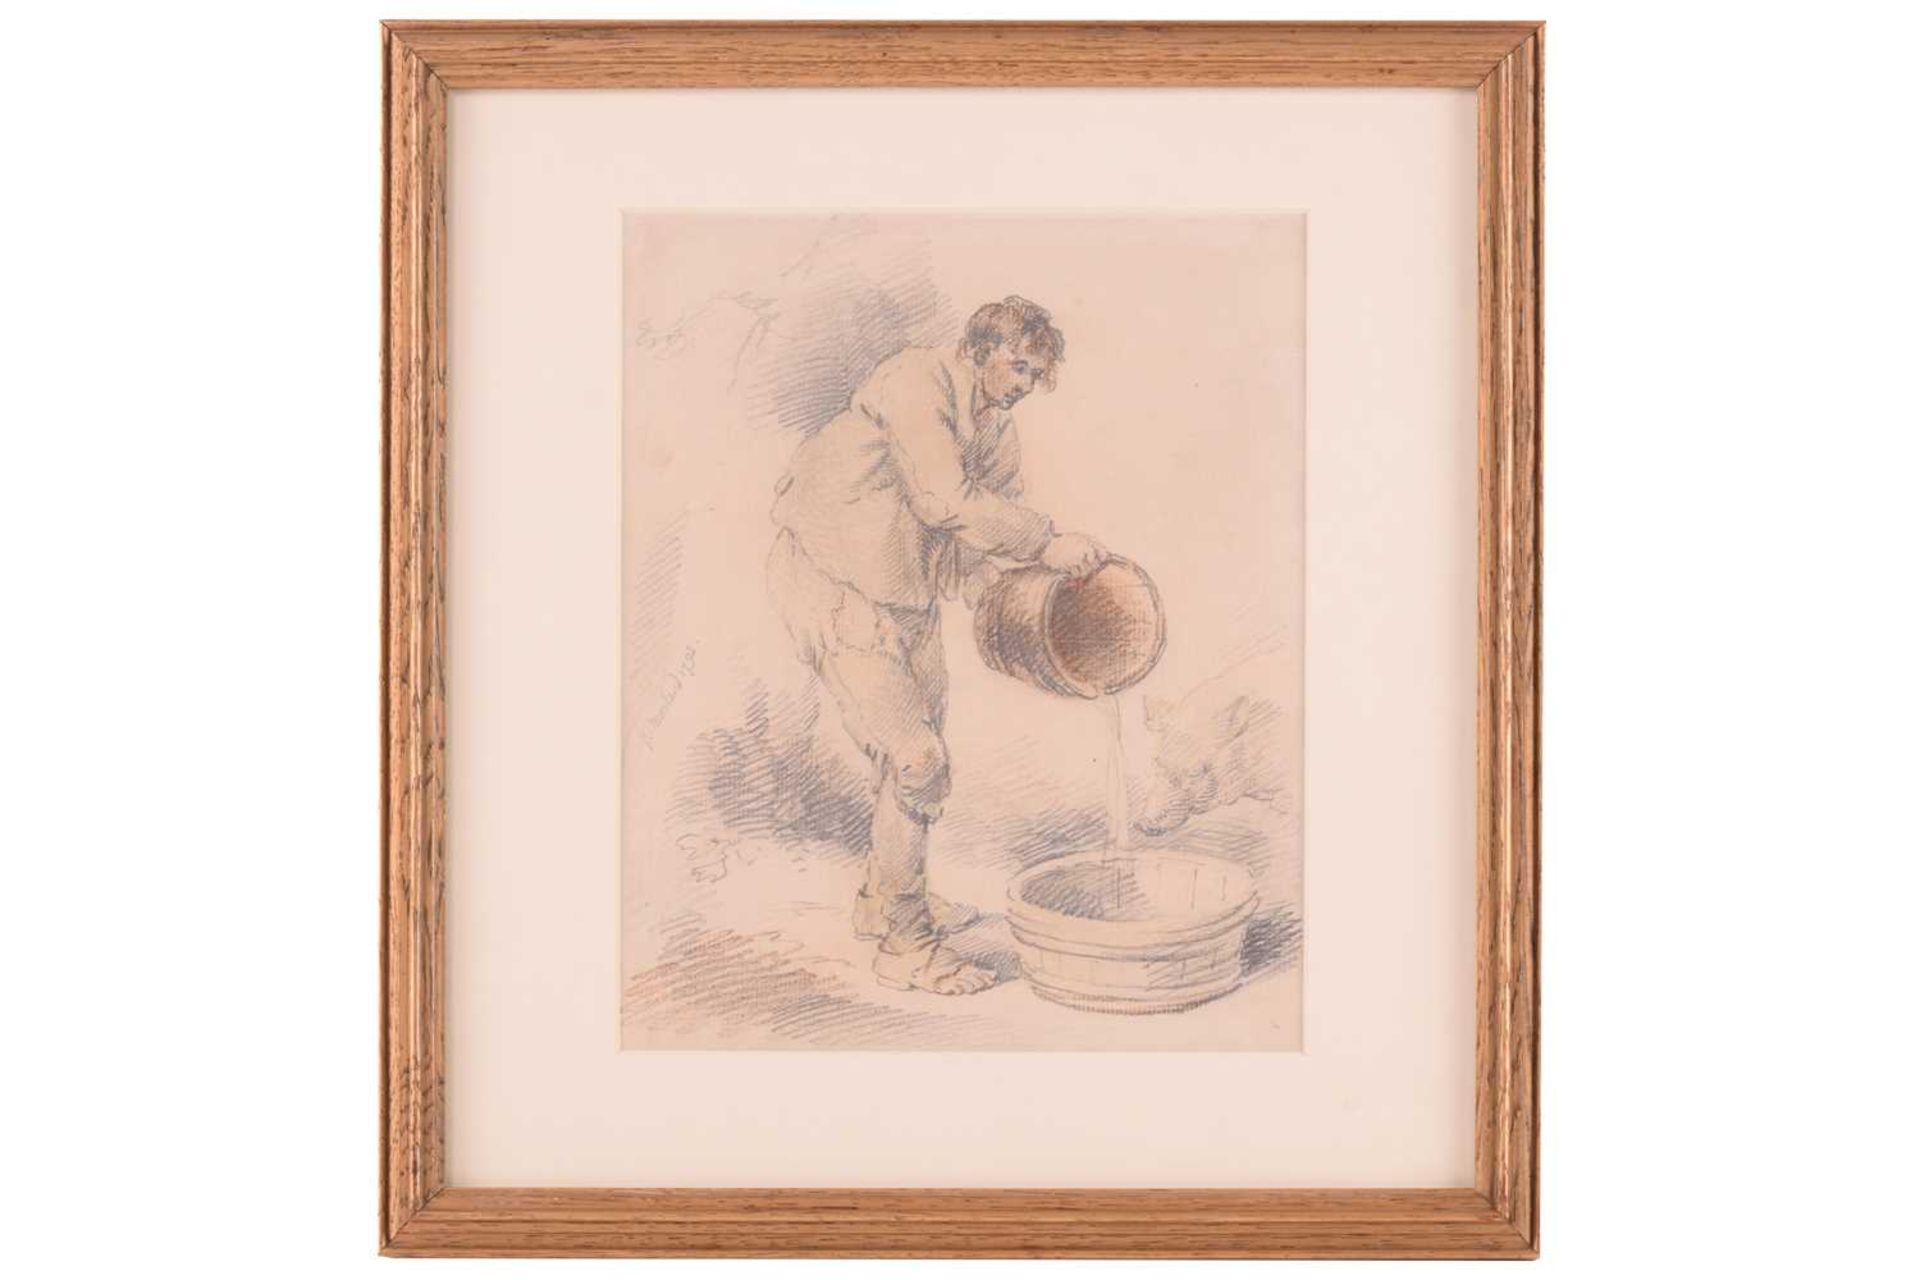 George Charles Morland (1762-1804), 'Filling the Trough', signed and dated ‘G.Morland 1792’,